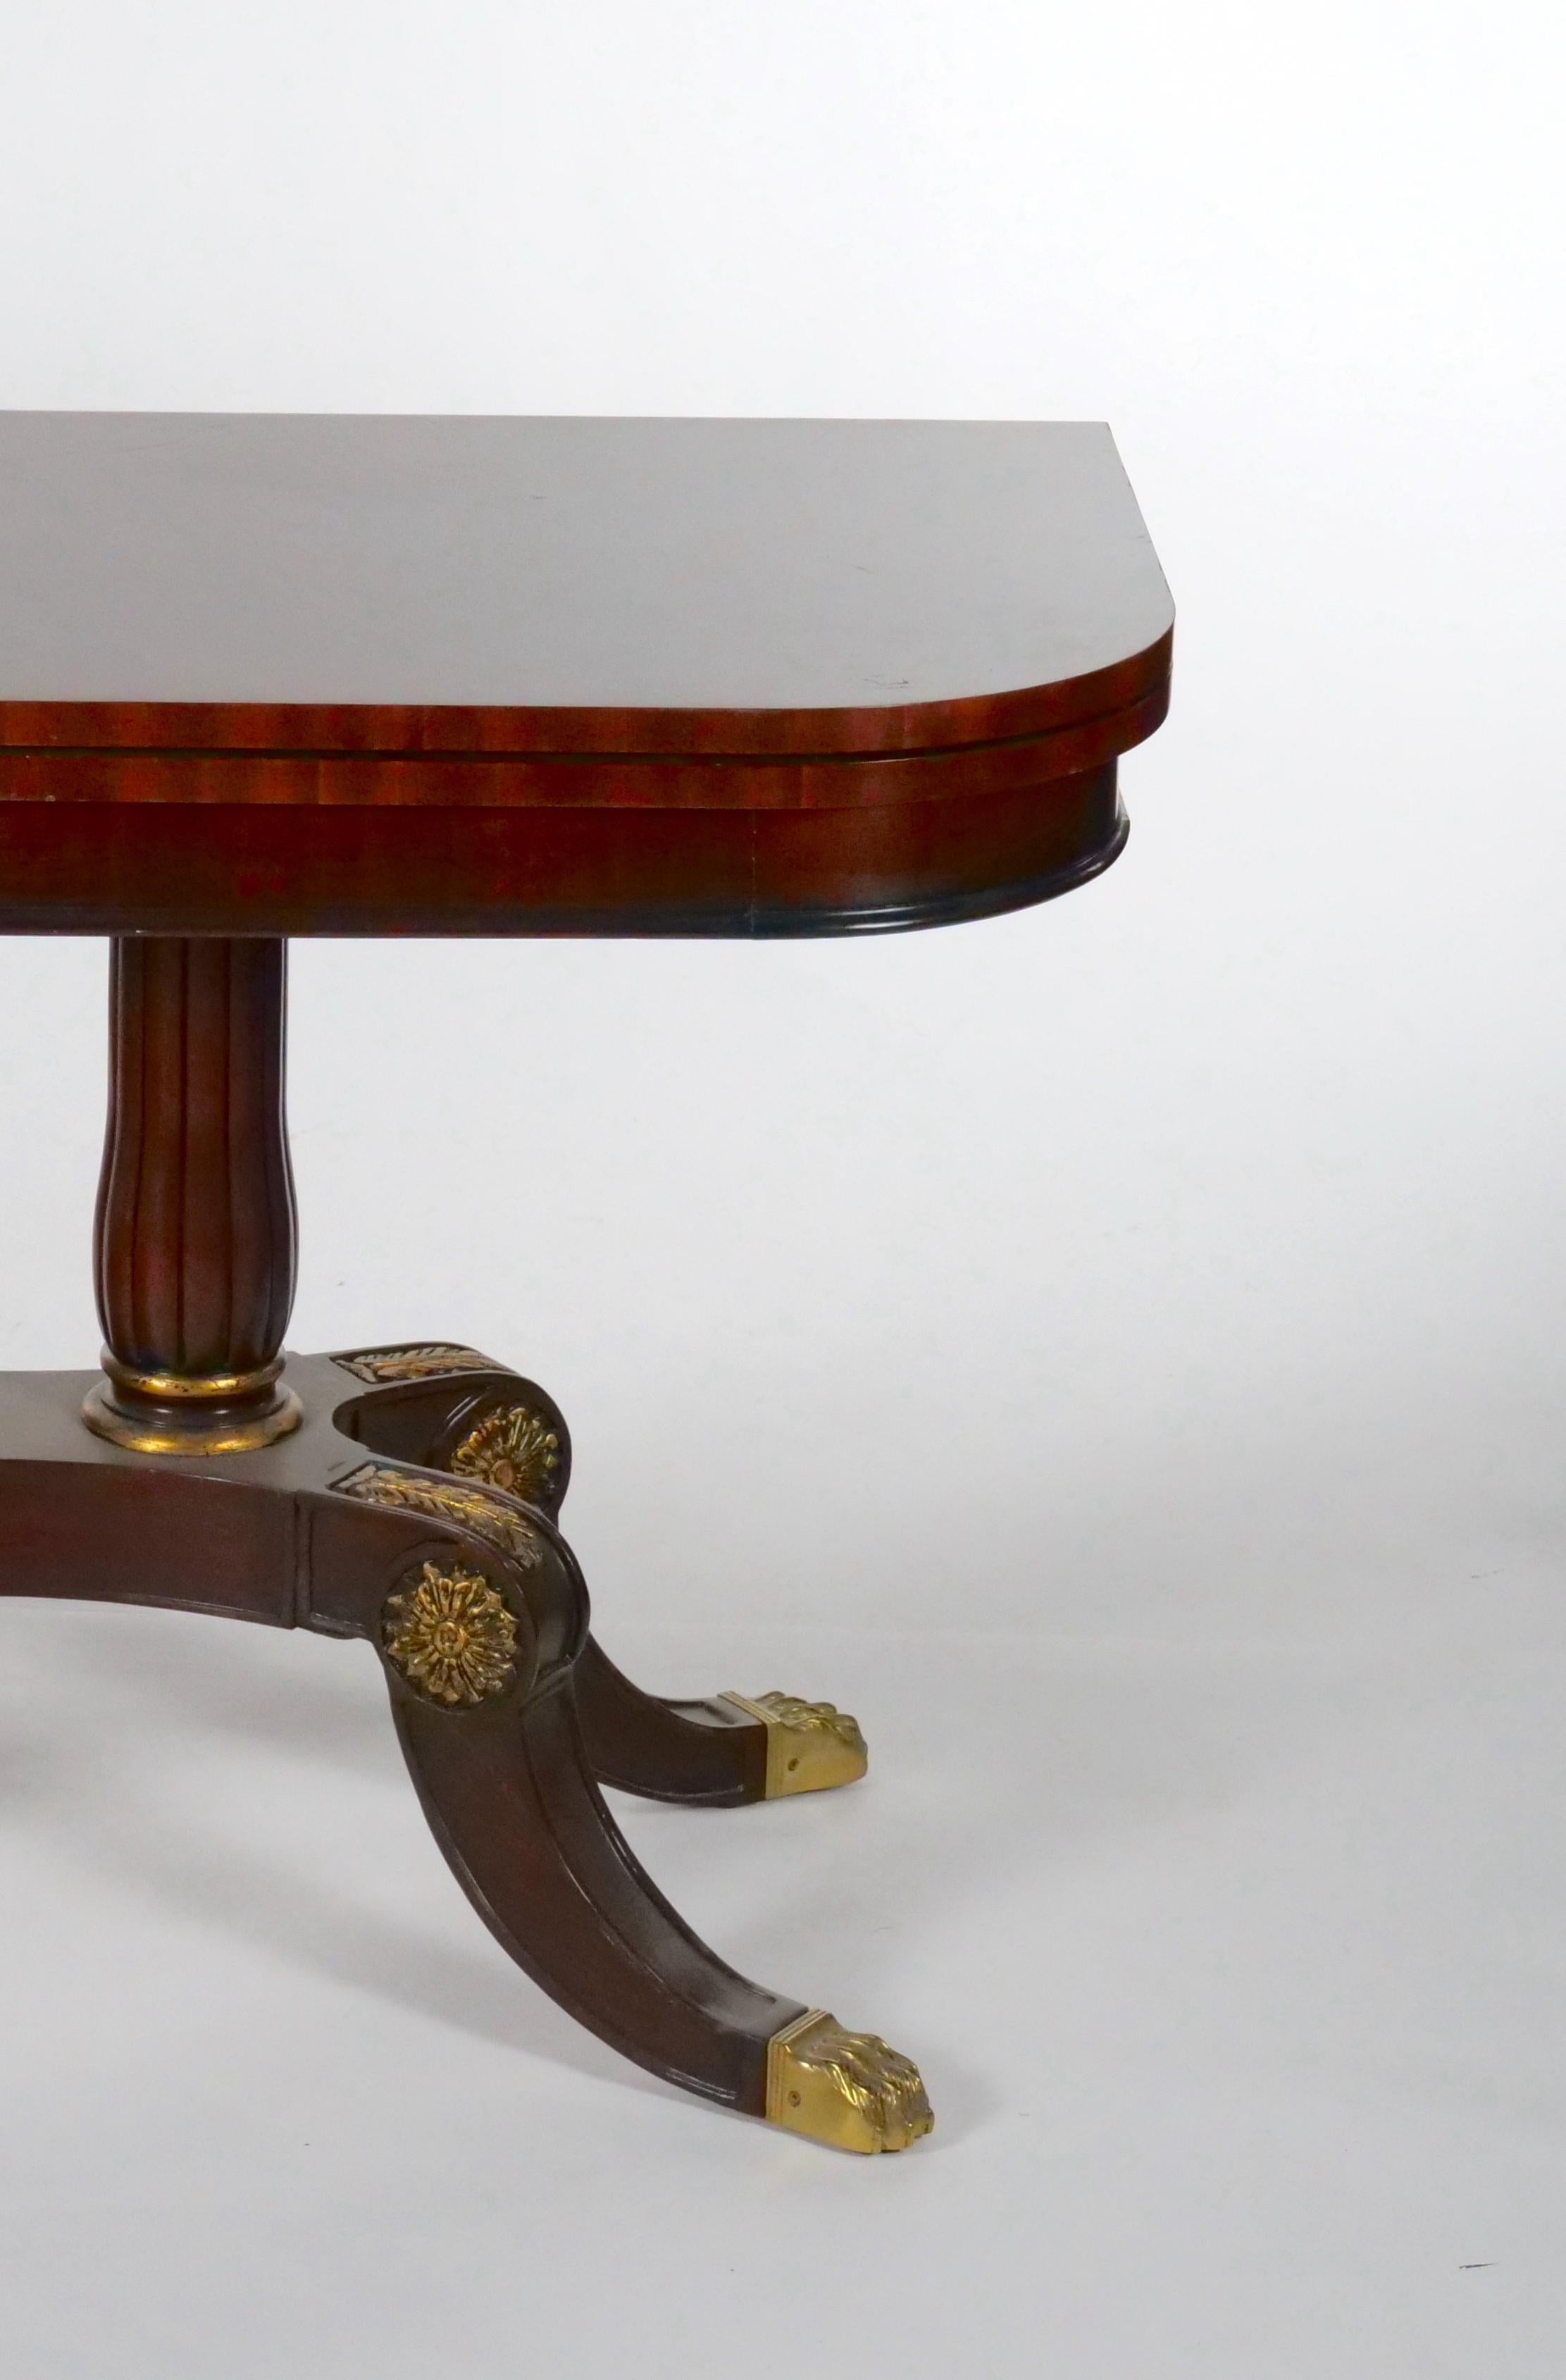 European Mid-20th Century Classical Style Mahogany Breakfast Table For Sale